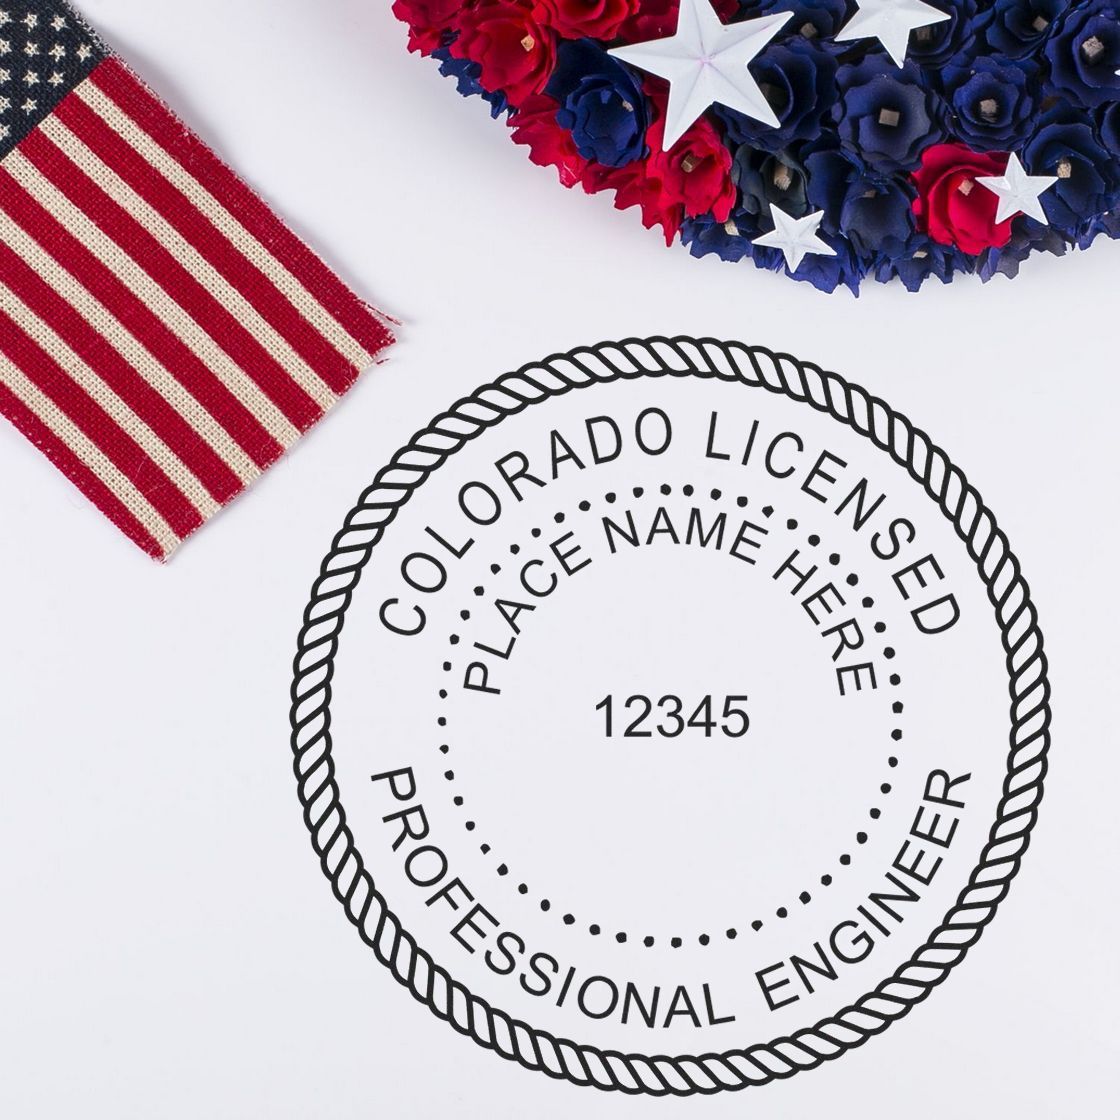 The main image for the Digital Colorado PE Stamp and Electronic Seal for Colorado Engineer depicting a sample of the imprint and electronic files